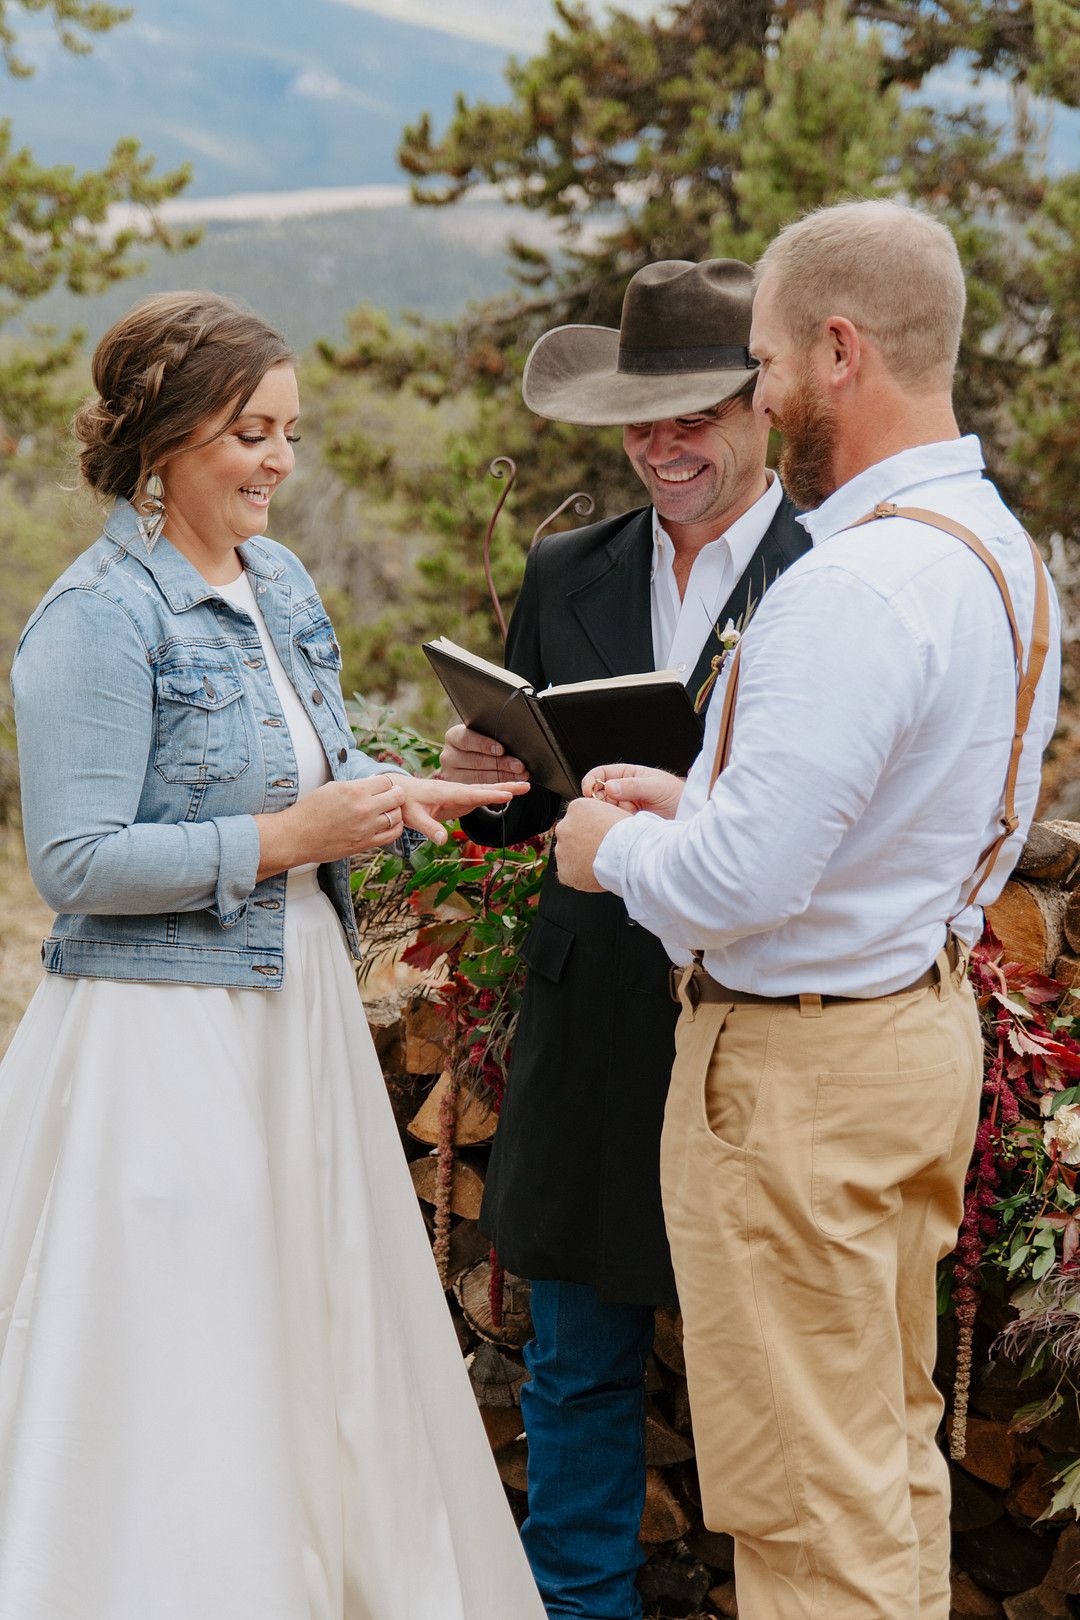 Bride and groom putting on rings at mountain elopement ceremony